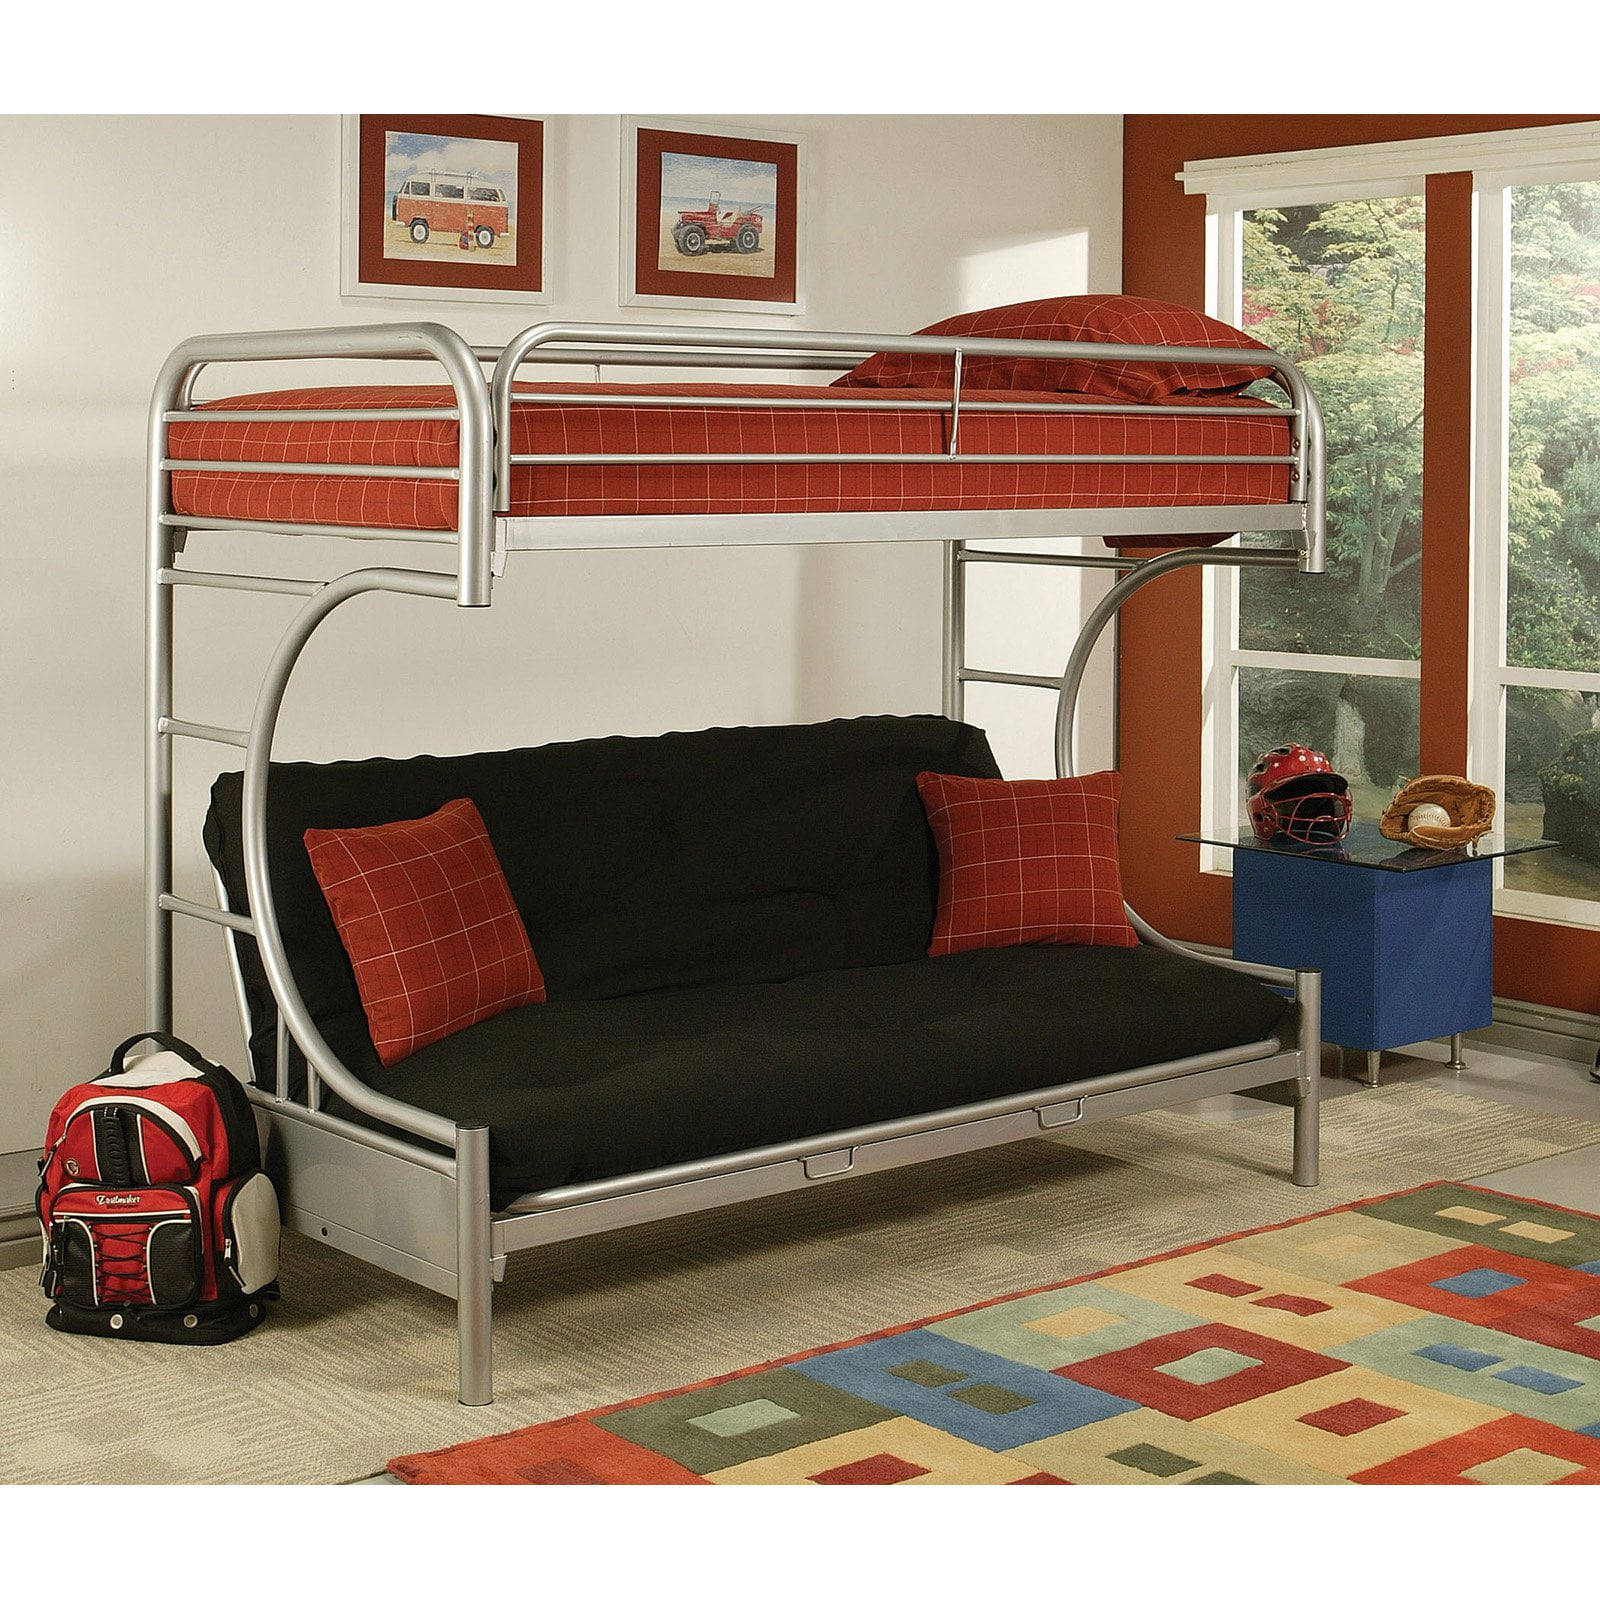 Eclipse Metal Bunk Bed Convertible, College Bunk Beds Twin Xl